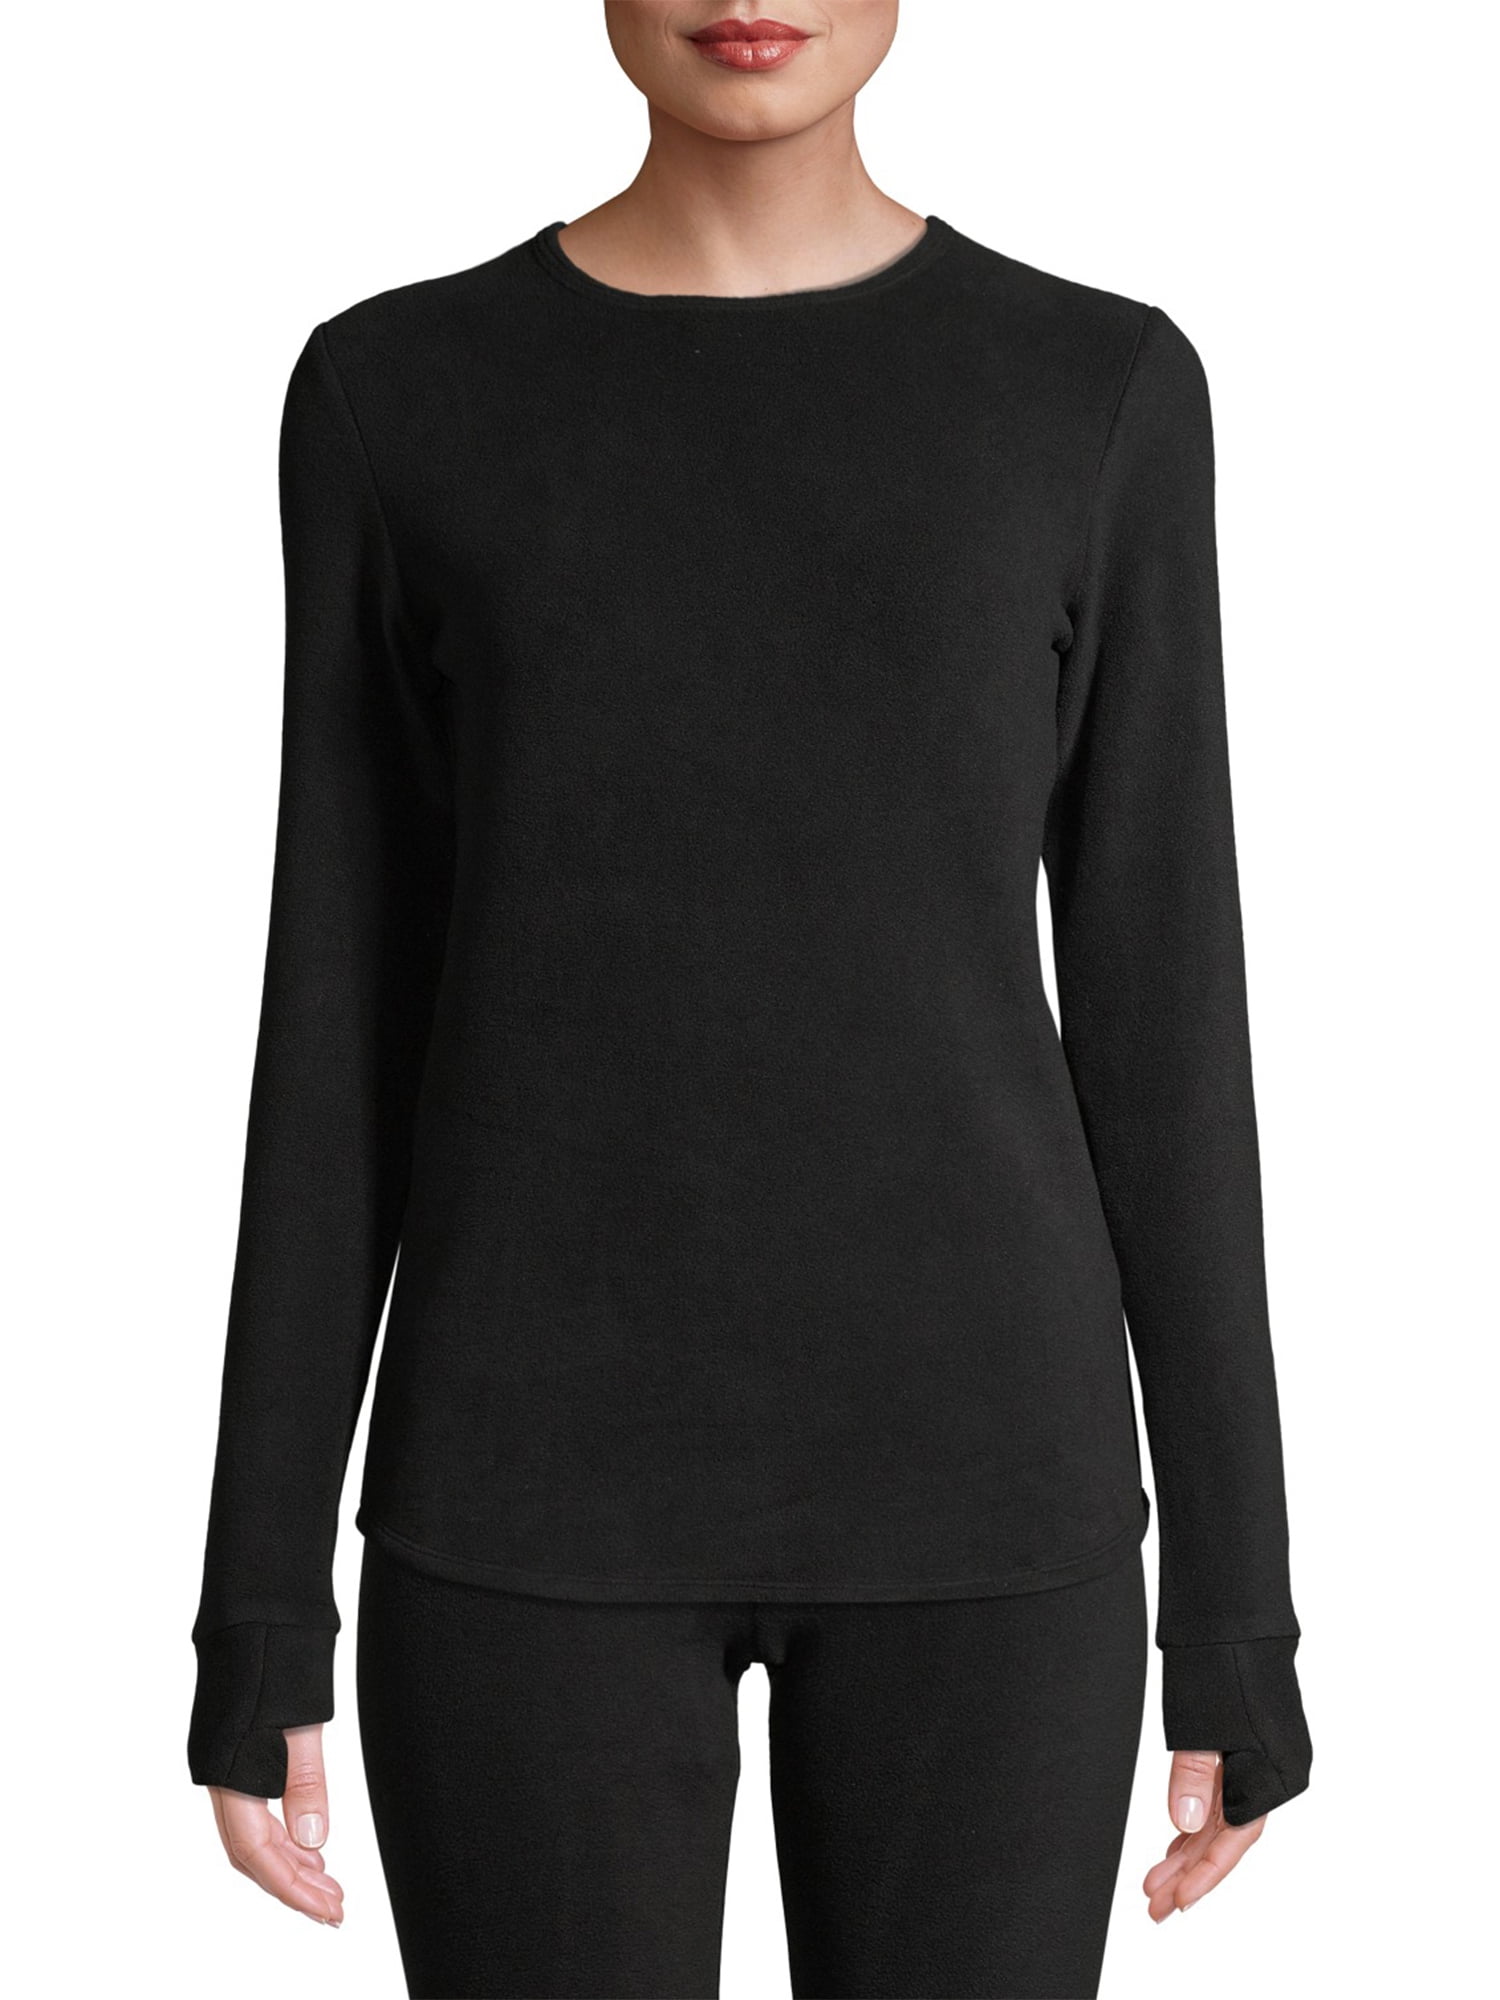 Cuddl Duds Womens Softwear with Stretch Long Sleeve Crew Neck Top Thermal Underwear Top